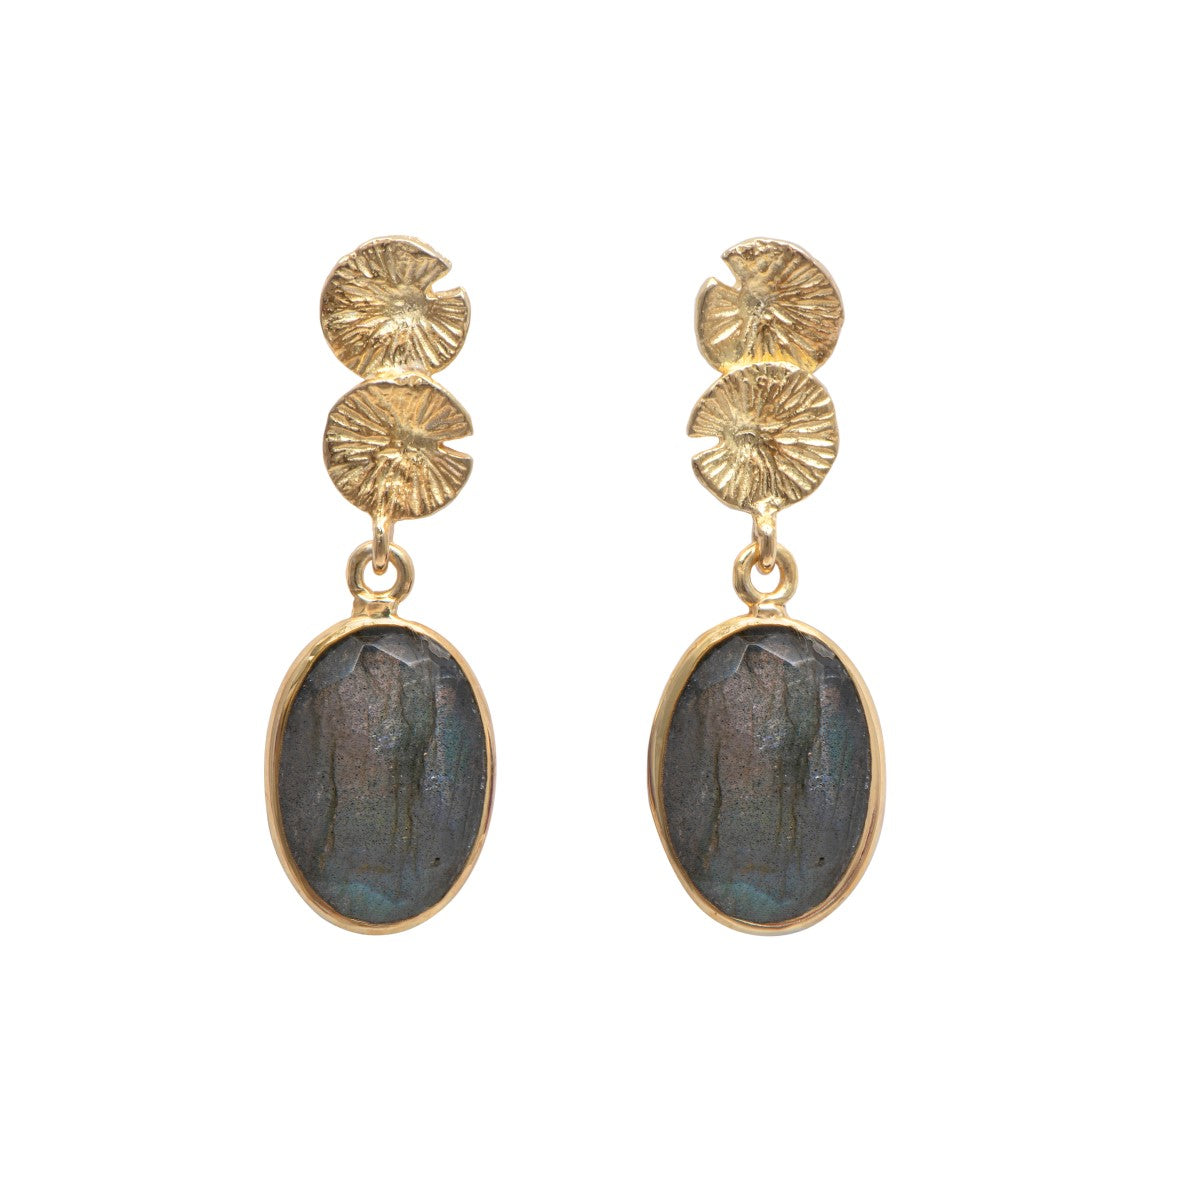 Lily Pad Earrings in Gold Plated Sterling Silver with a Labradorite Gemstone Drop